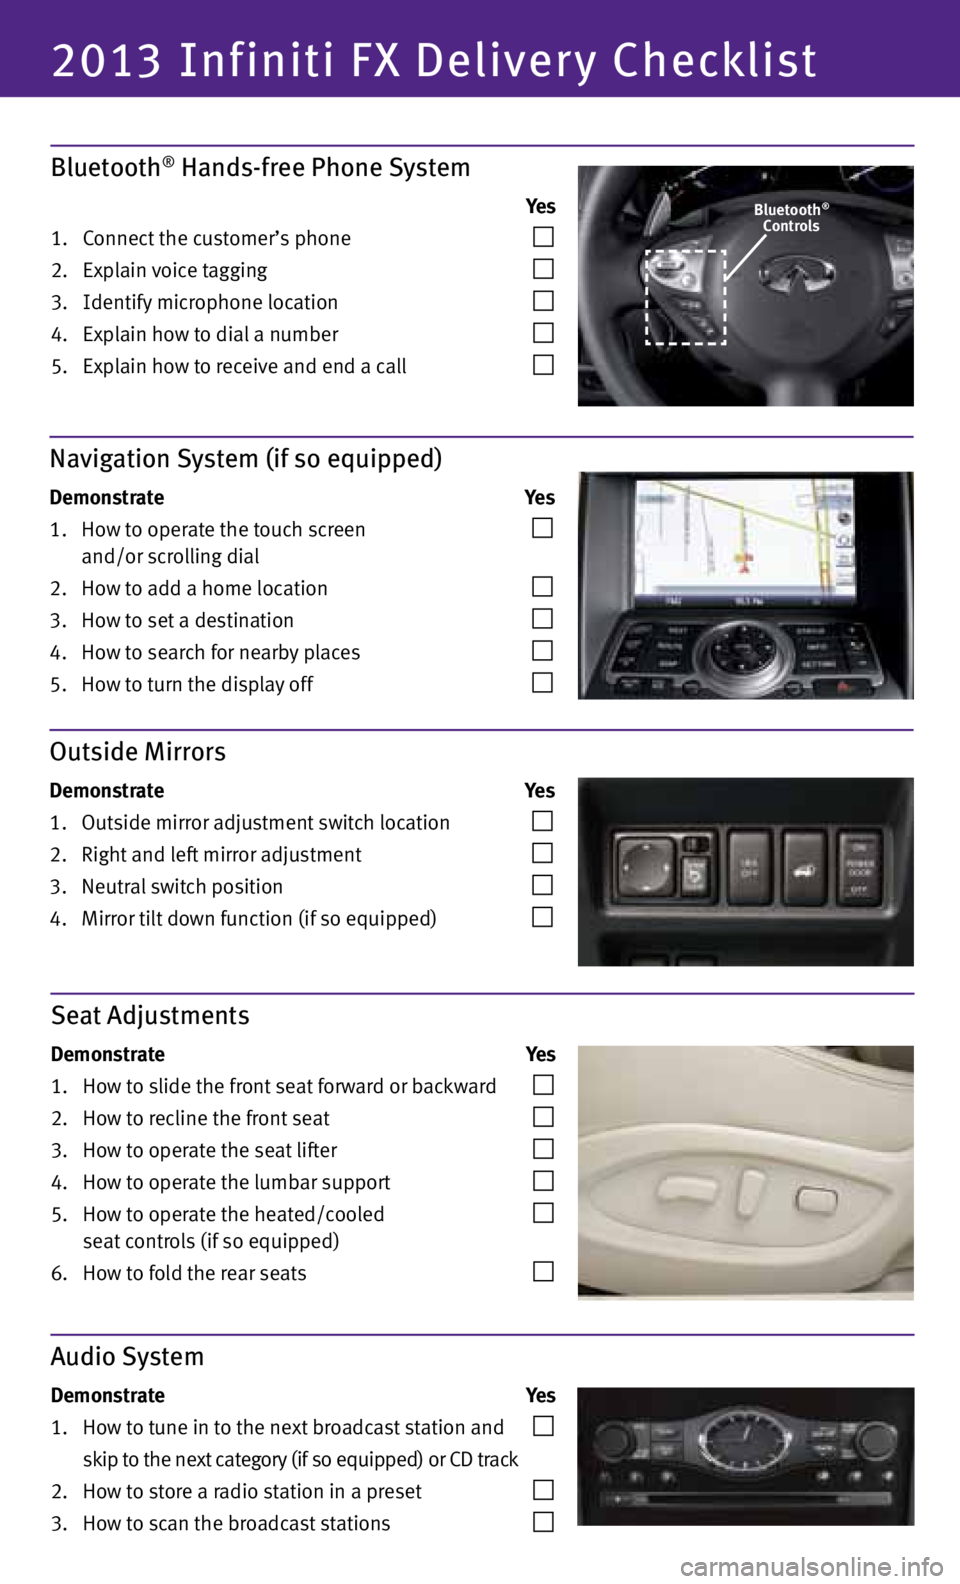 INFINITI FX 2013  Quick Reference Guide 2013 Infiniti FX Delivery Checklist
Bluetooth® Hands-free Phone System
          Ye s
1.   Connect the customer’s phone 
 
  
2.   Explain voice tagging 
 
  
3.   Identify microphone location 
 
 